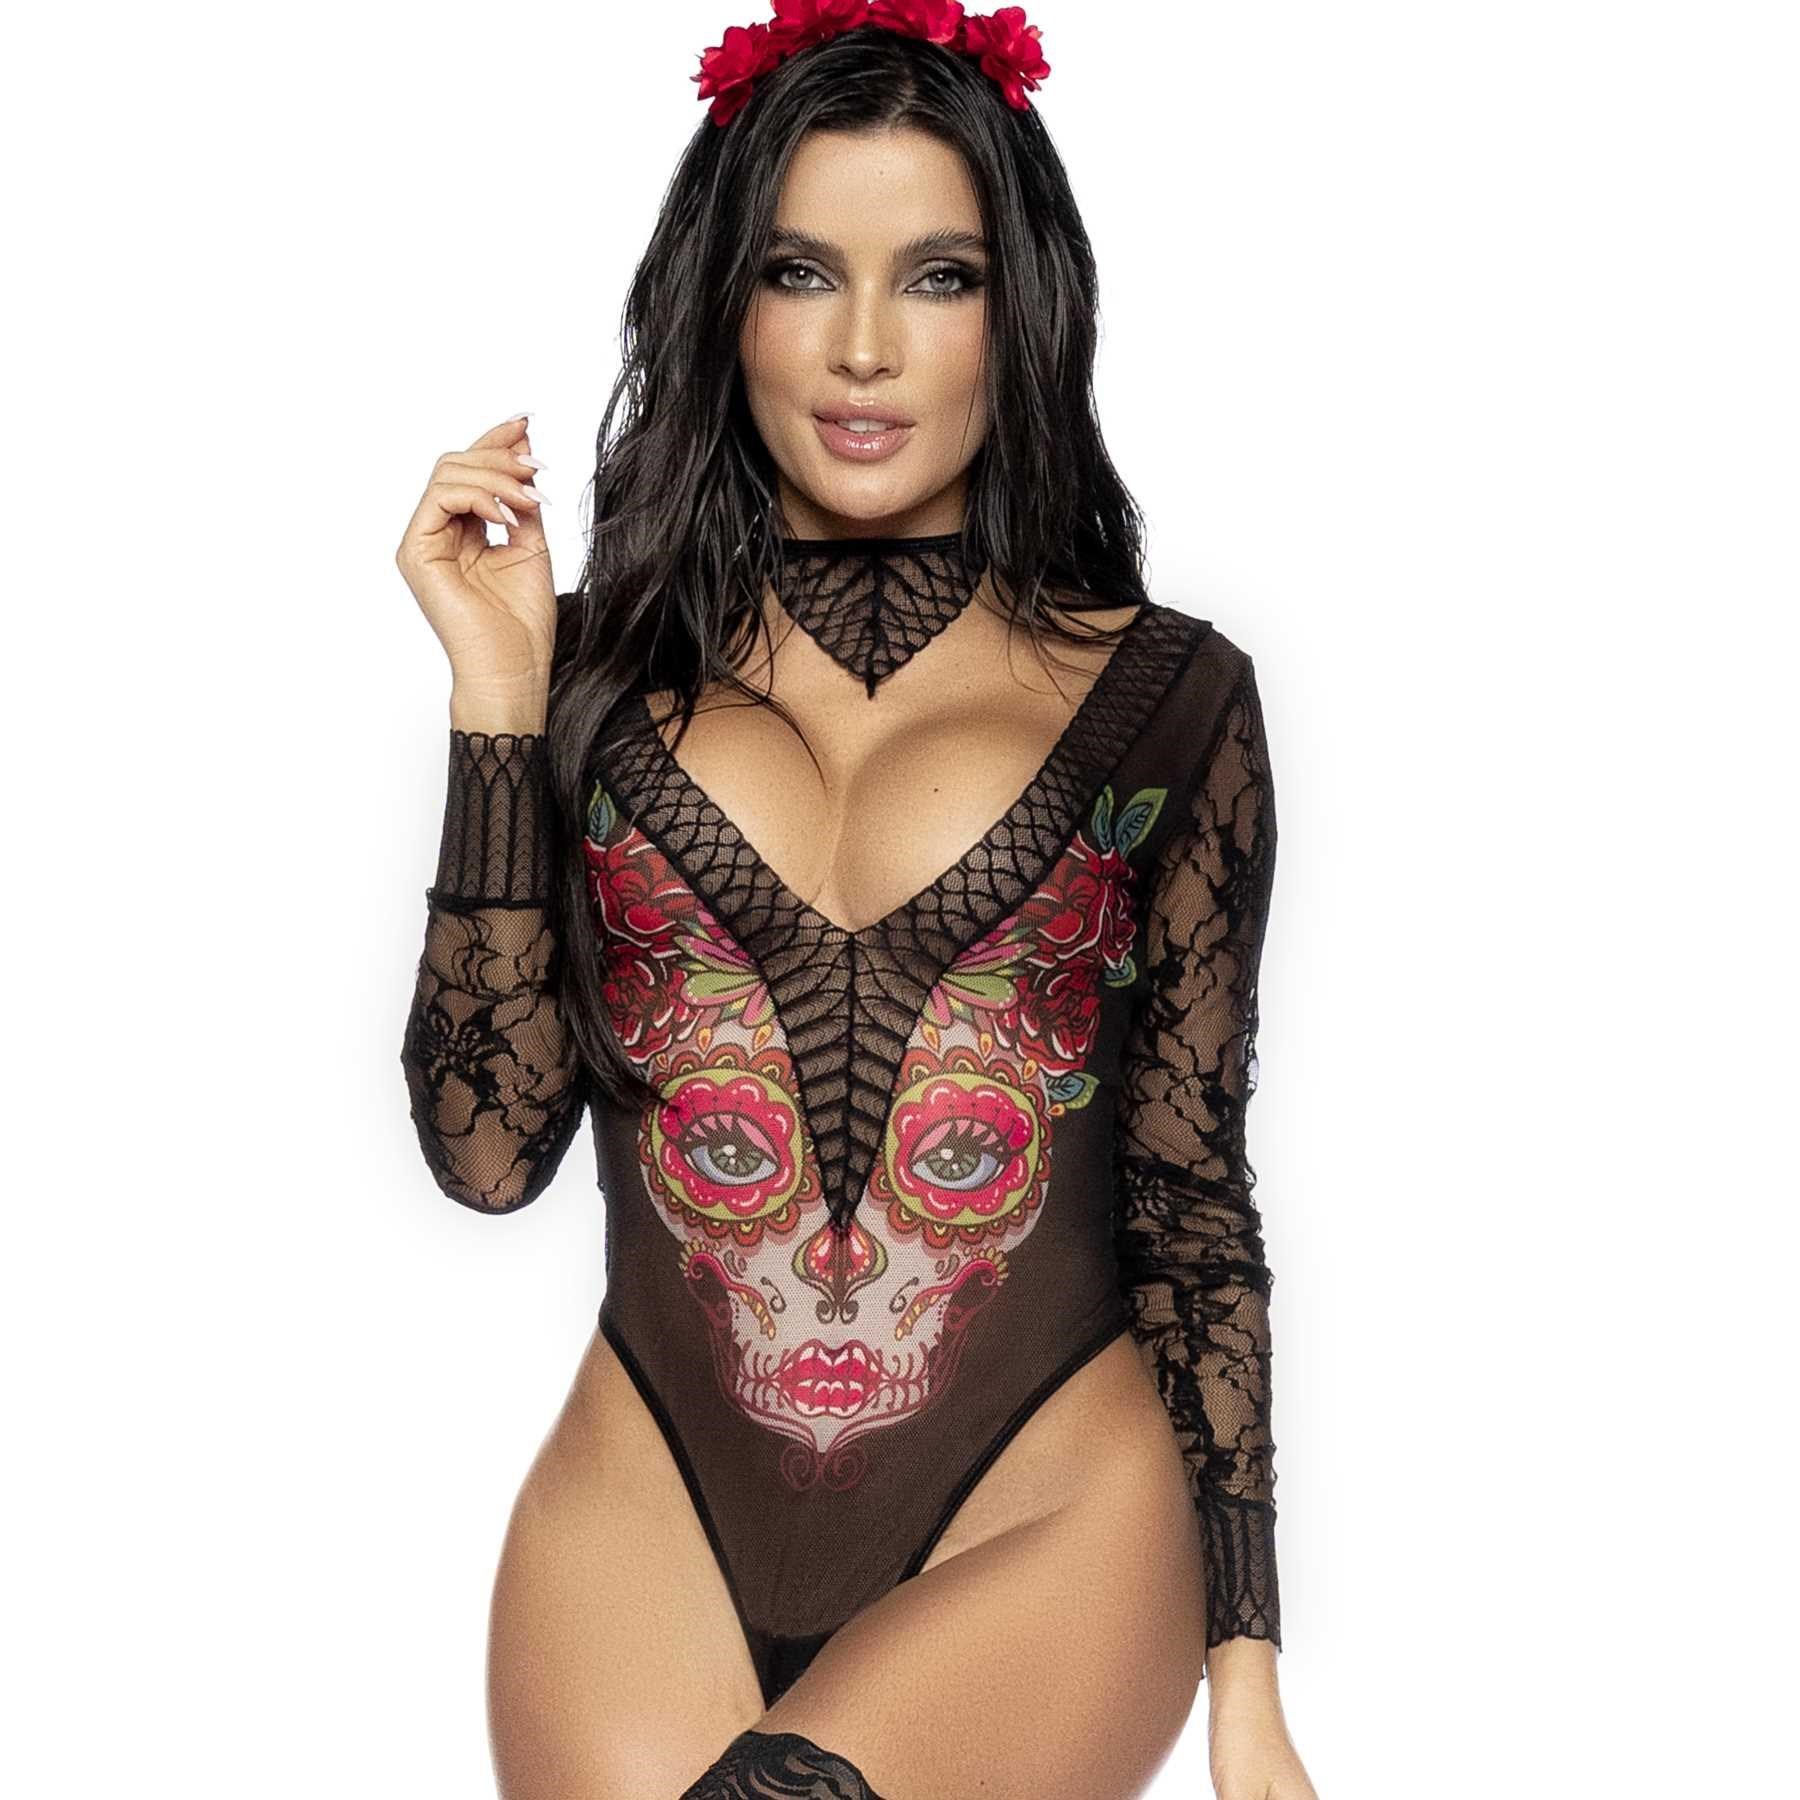 Sexy Catrina - 3PC. Long Sleeved Bodysuit, Collar, and Head Piece. front cropped